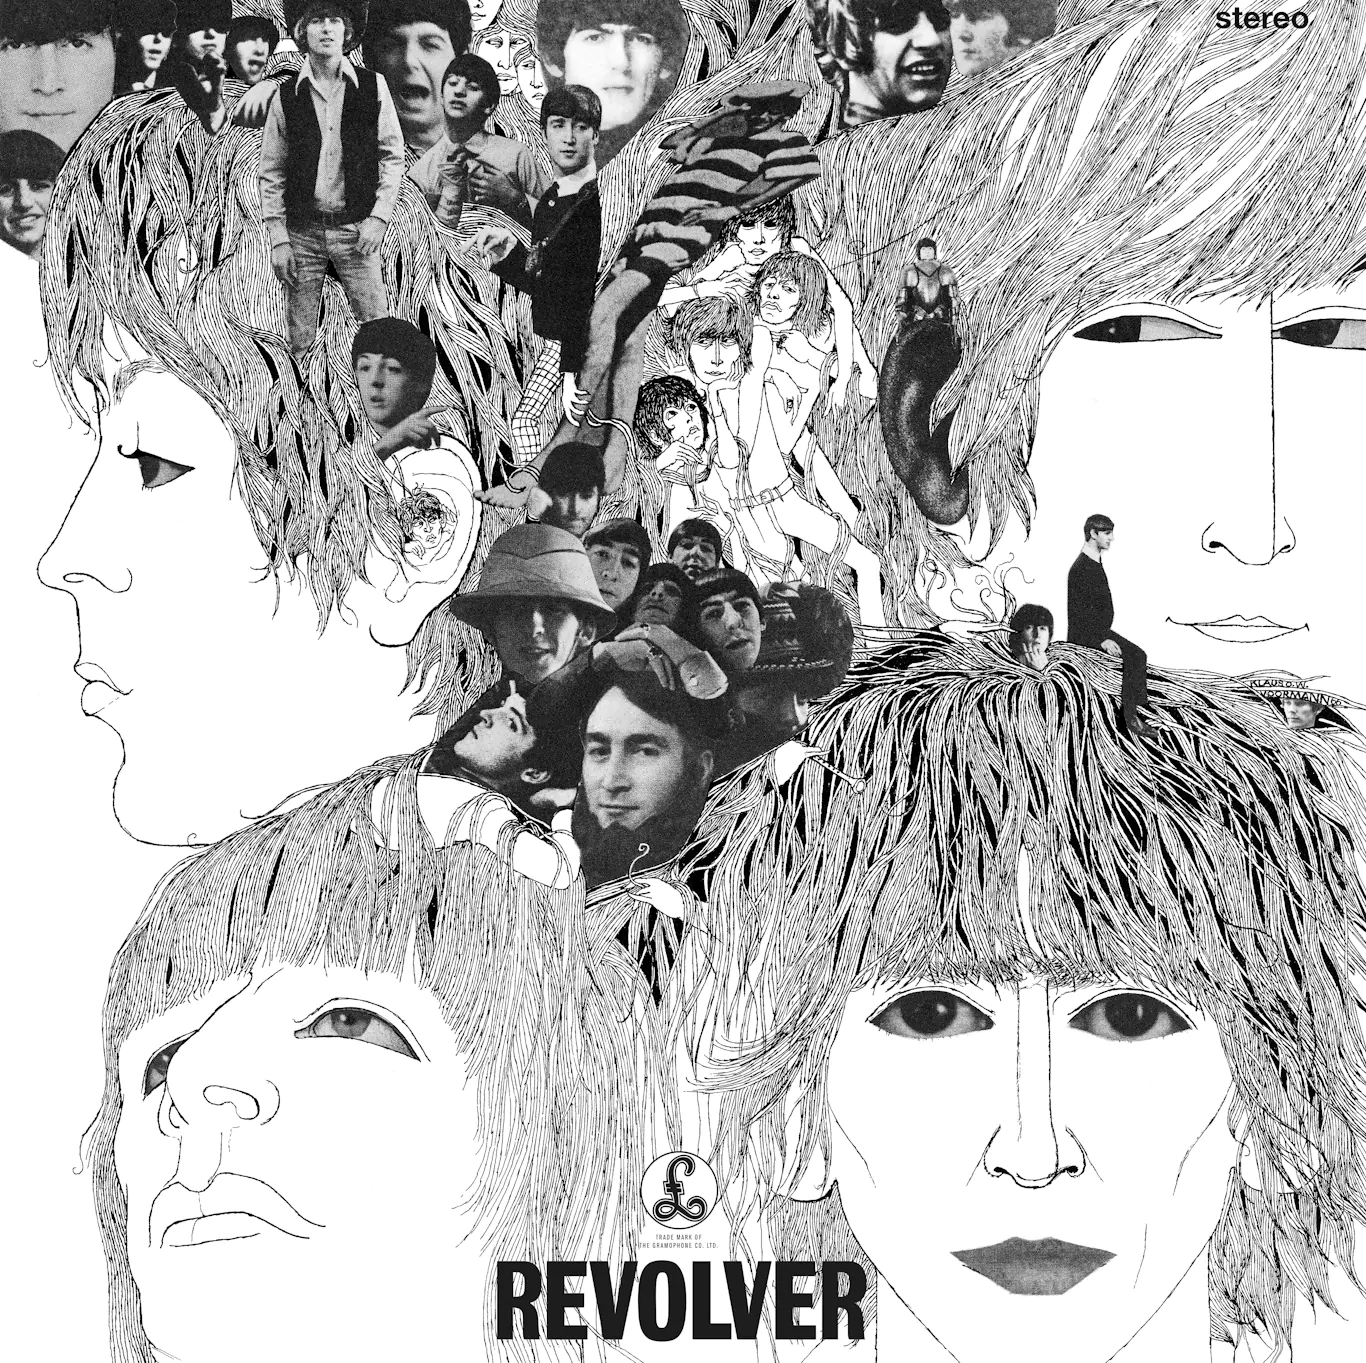 THE BEATLES Announce Newly Mixed & Expanded Special Edition of ‘Revolver’ & reveal new Stereo mix & Dolby Atmos mix of ‘Taxman’